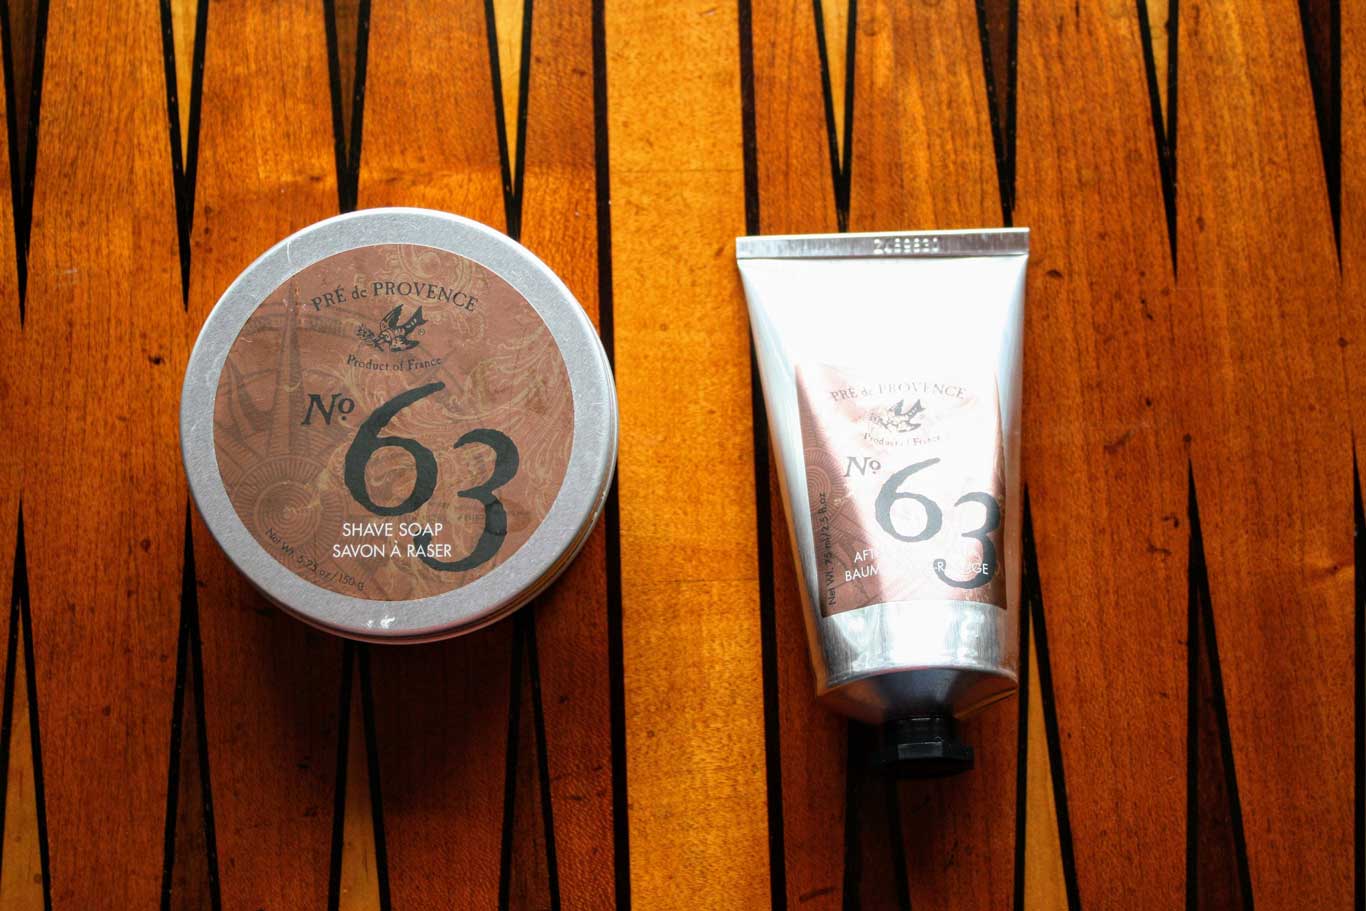 Pre de Provence 63 Shaving Soap and Aftershave Balm